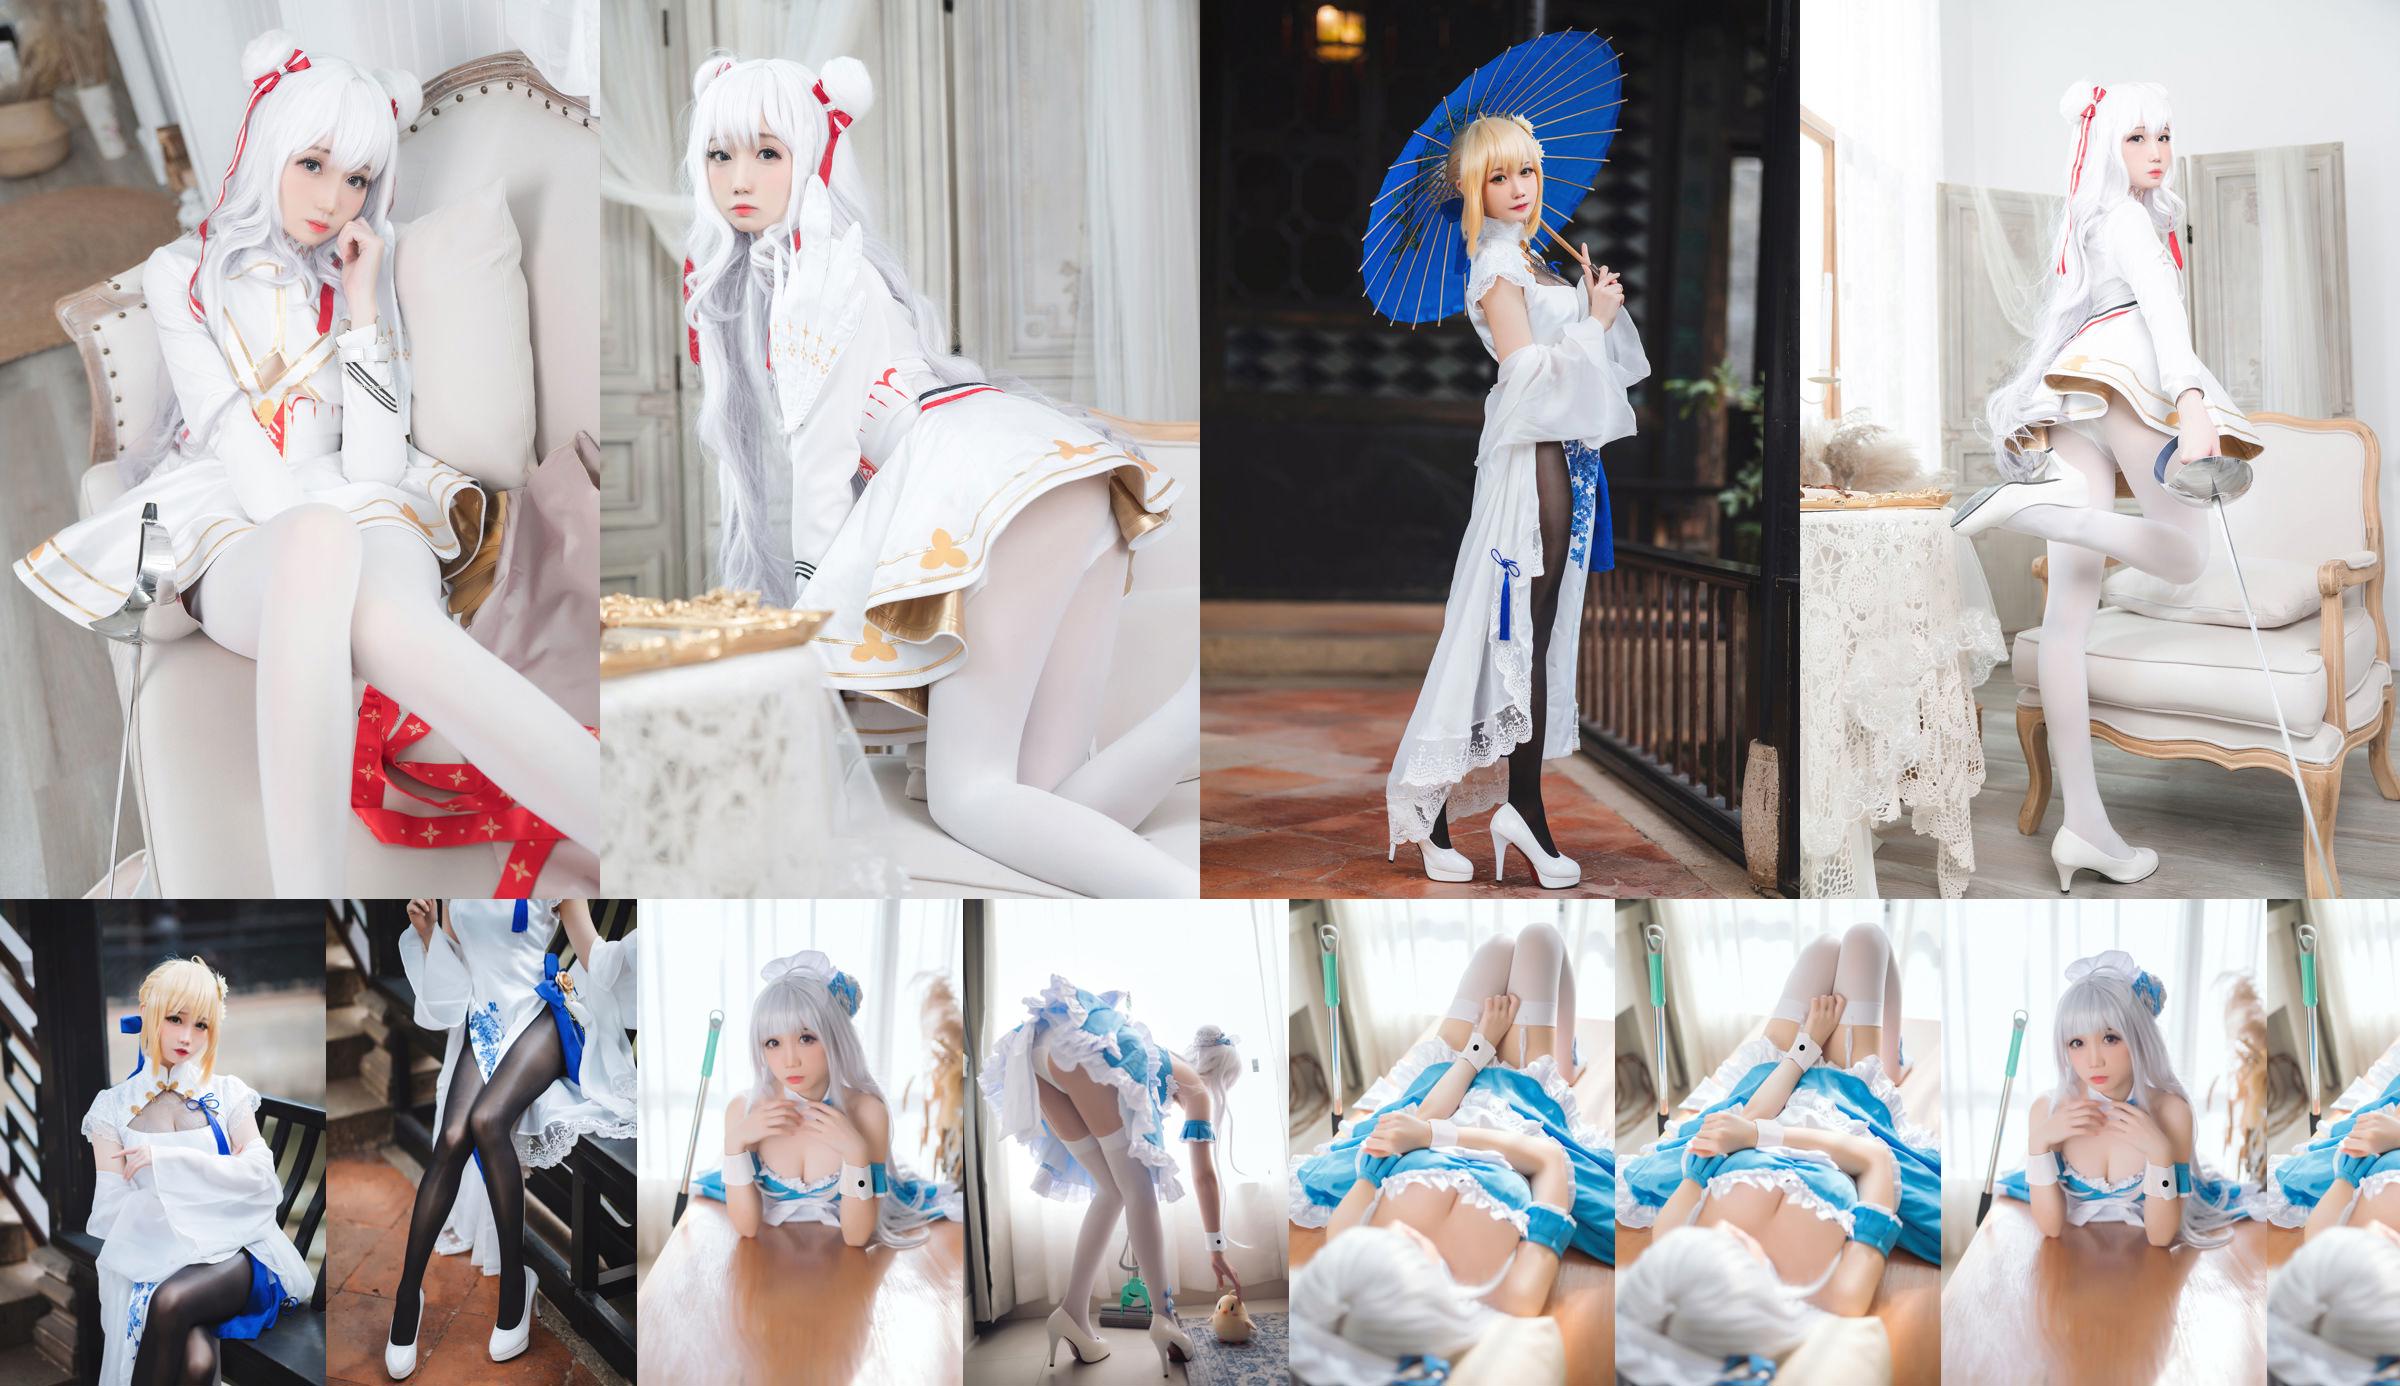 [Net Red COSER Photo] Geschmorte Holzkohle - Little Swan Maid No.38cfd6 Seite 15